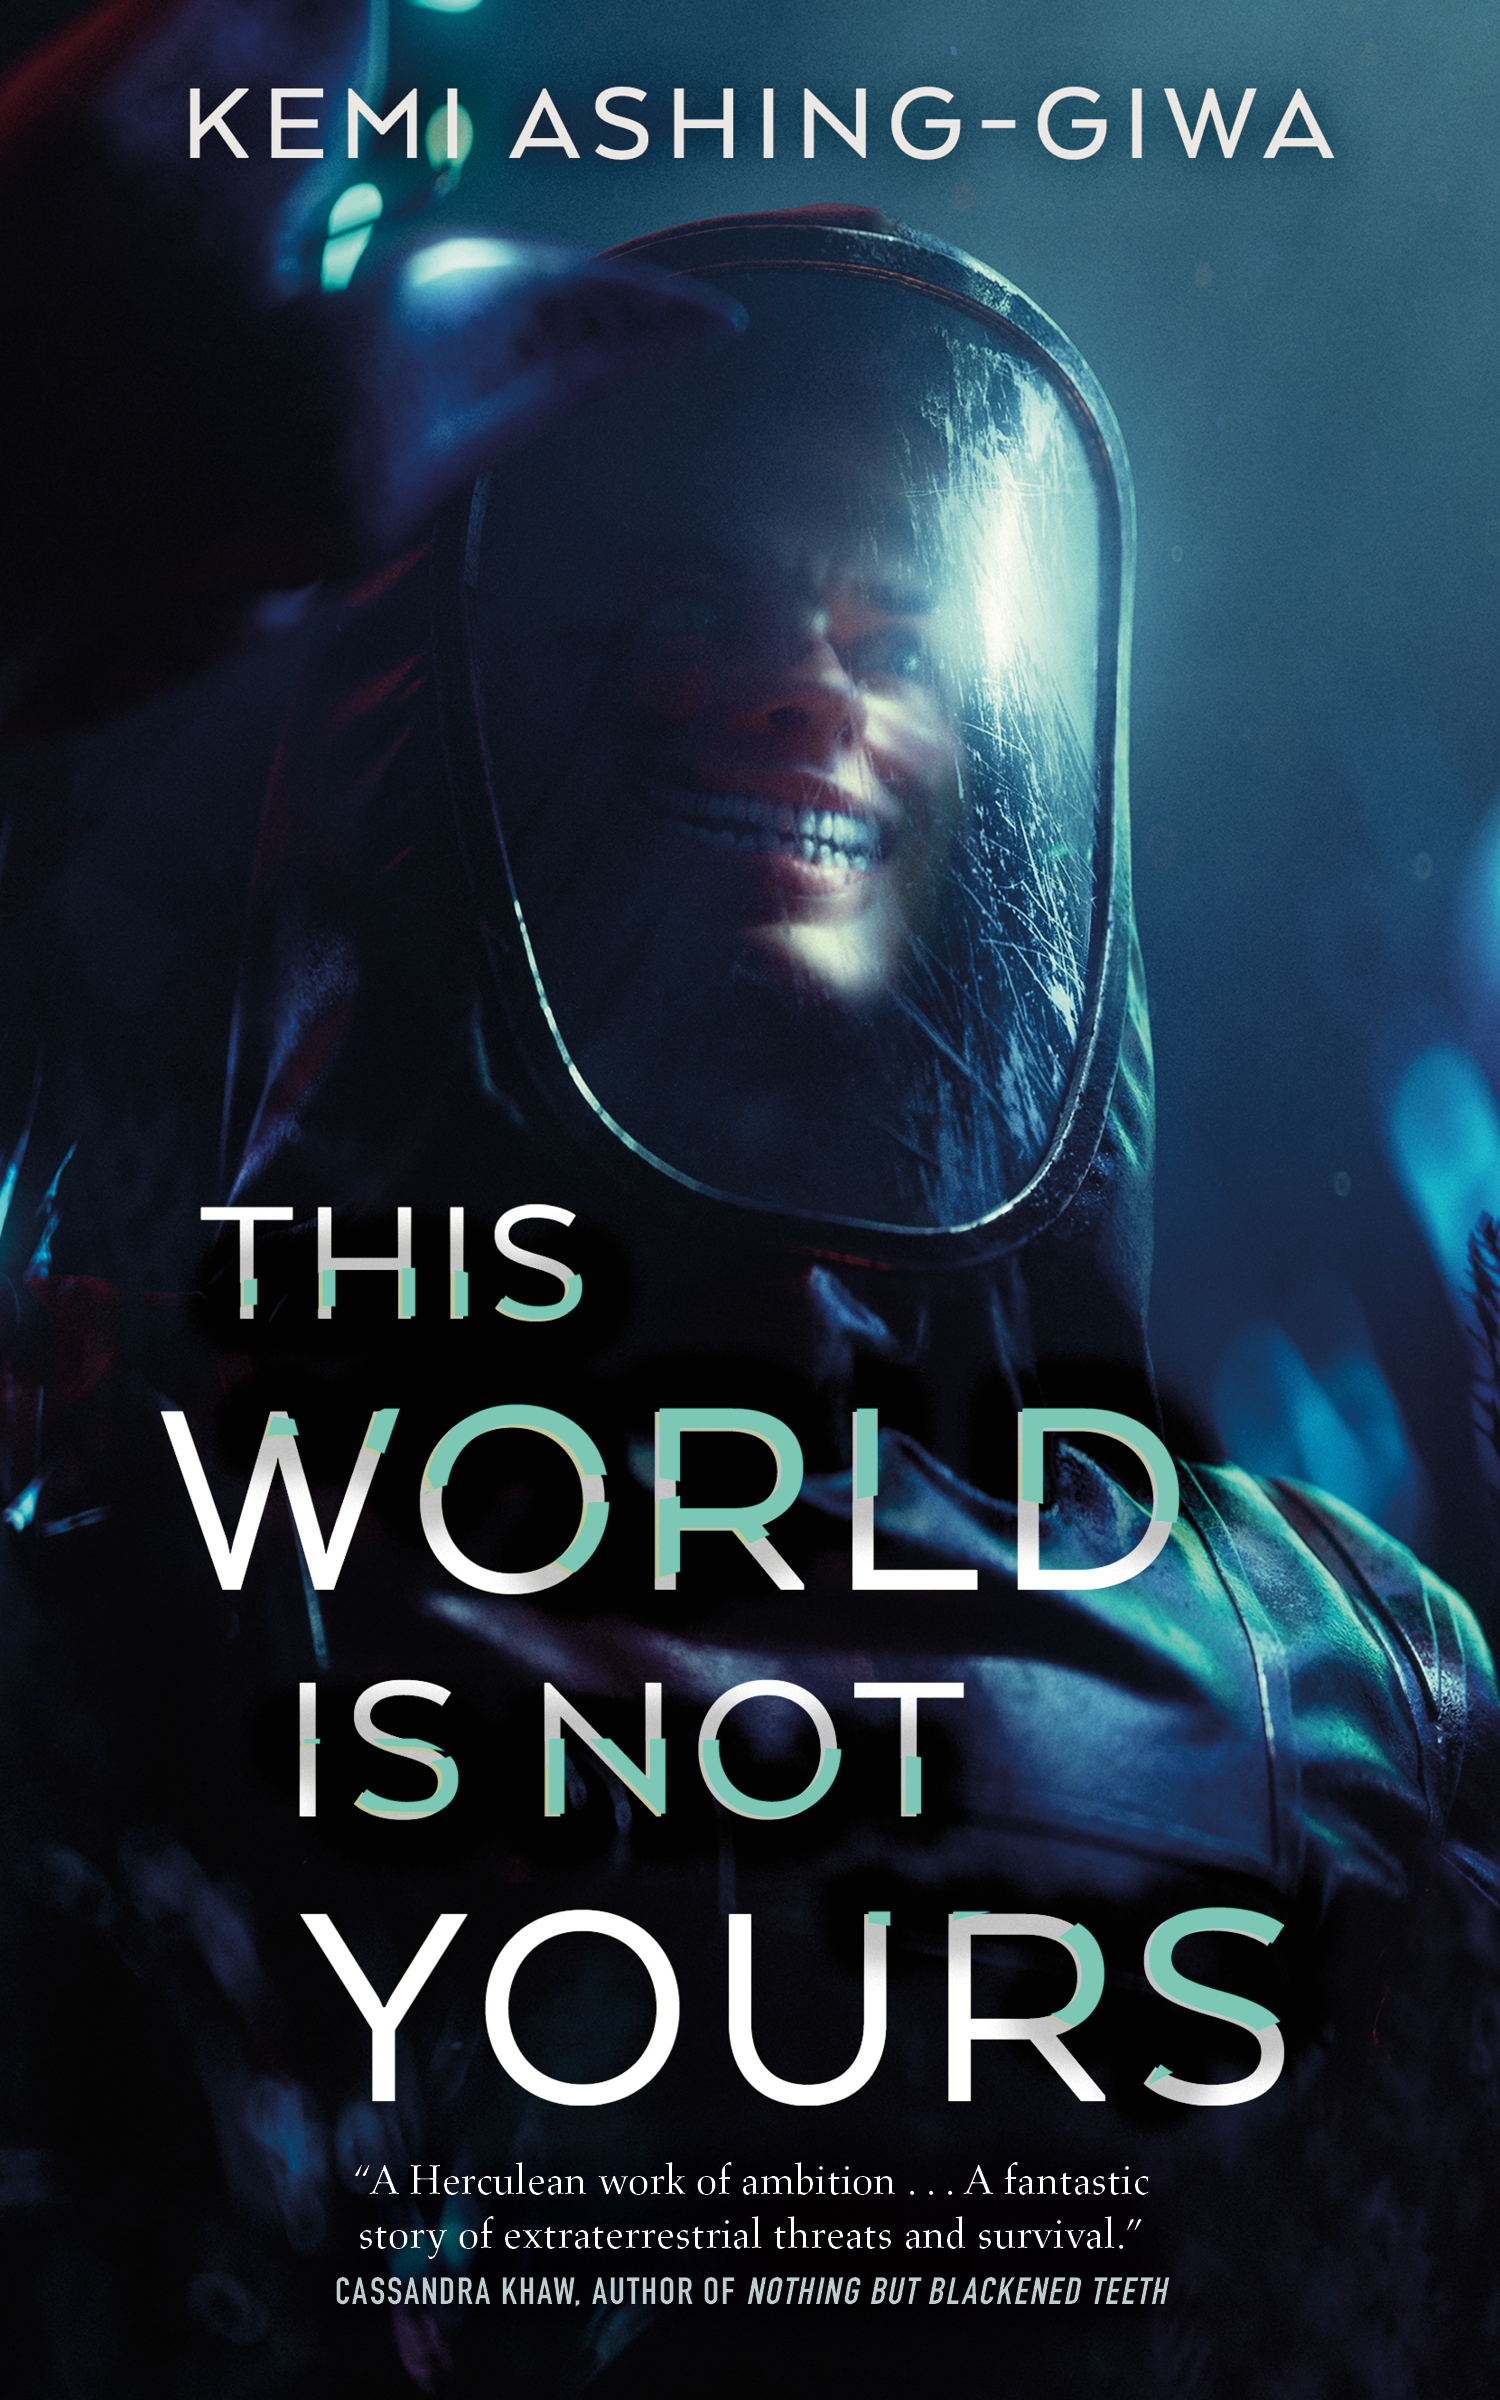 This World Is Not Yours by Kemi Ashing-Giwa